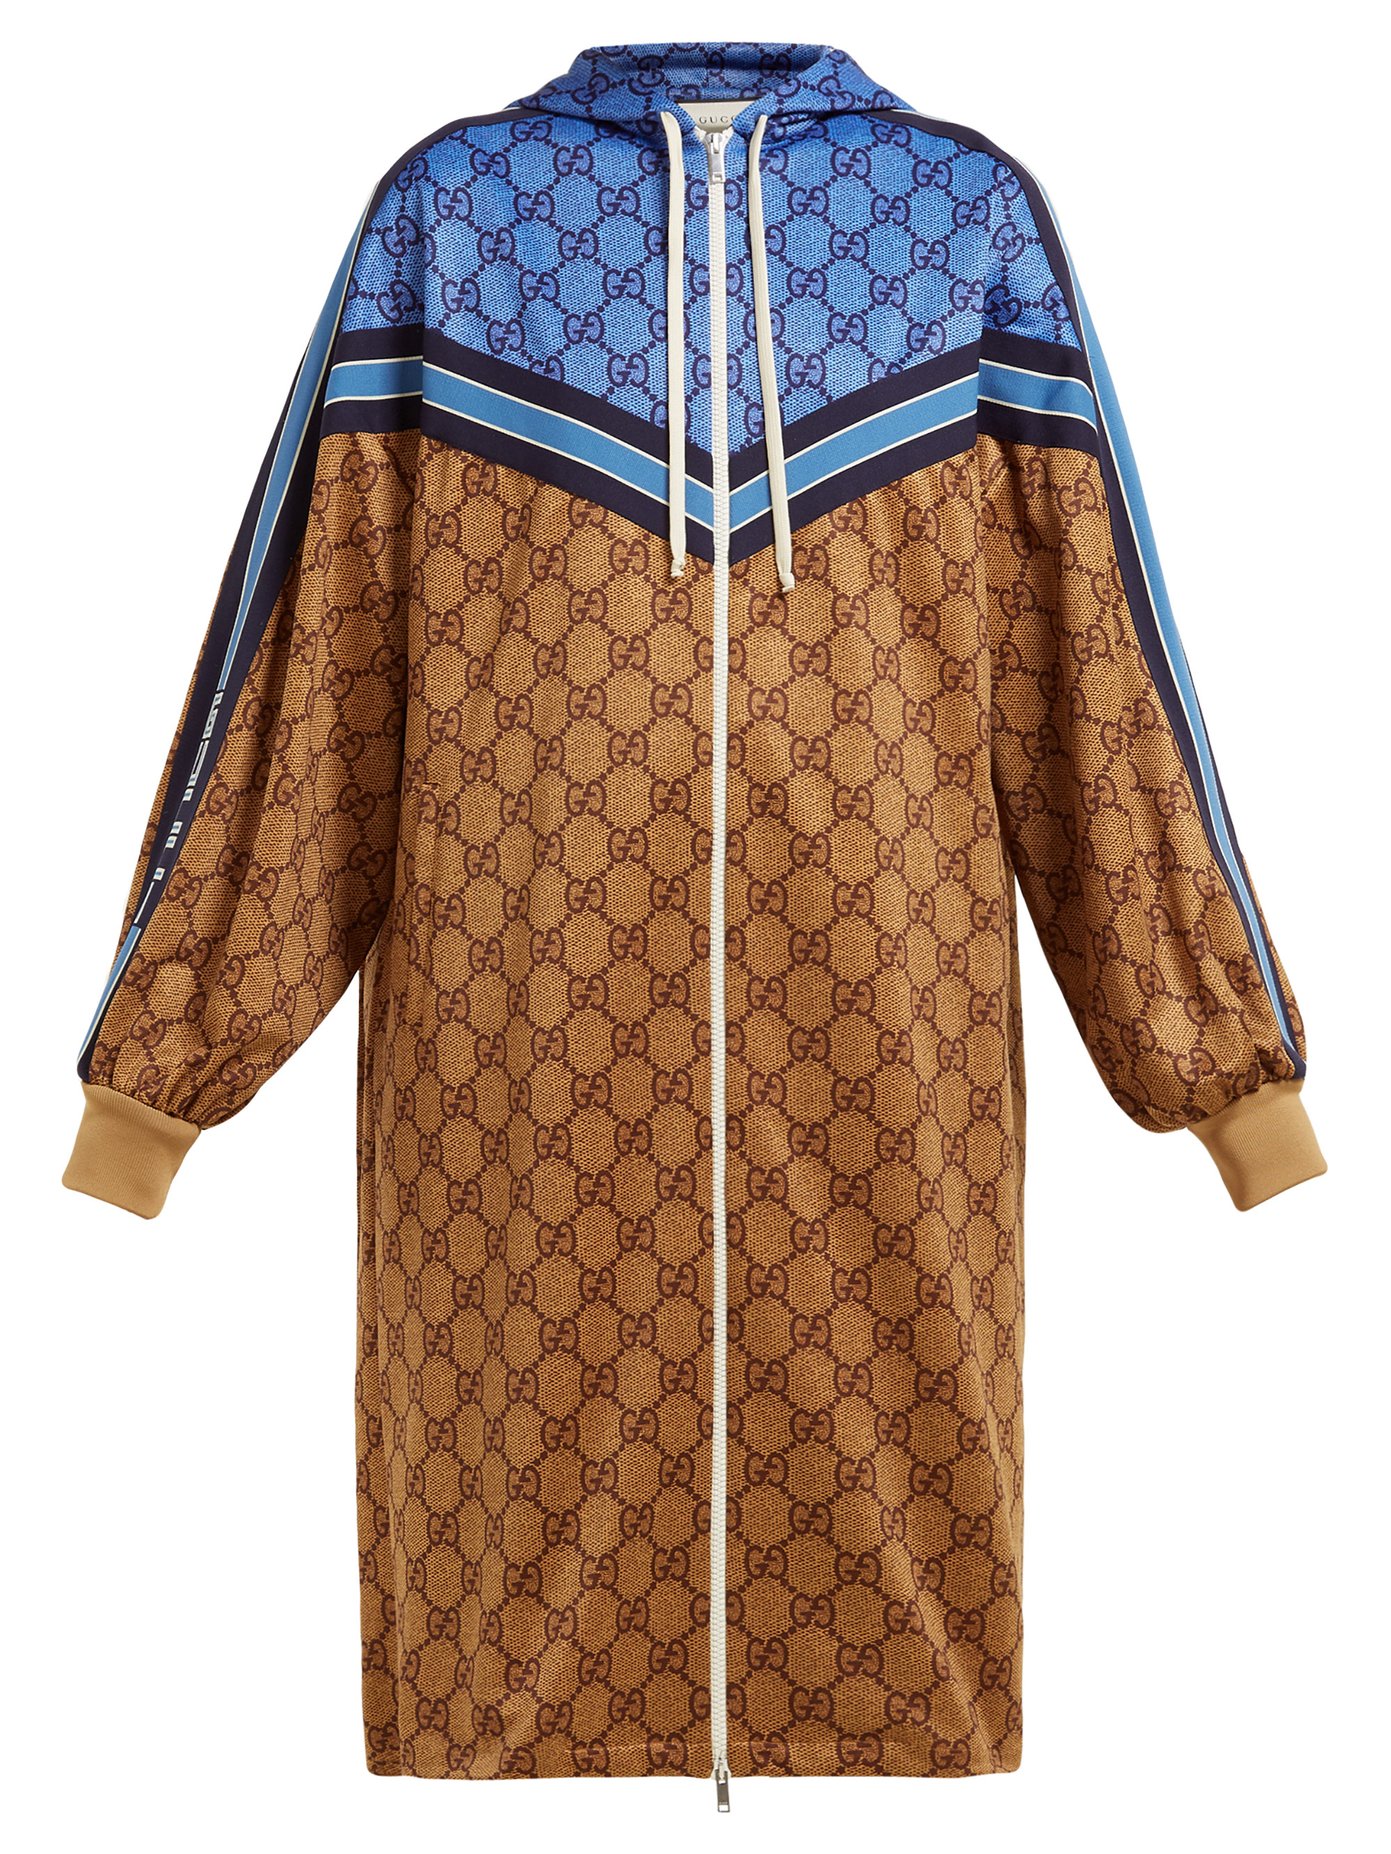 gucci hooded jersey dress